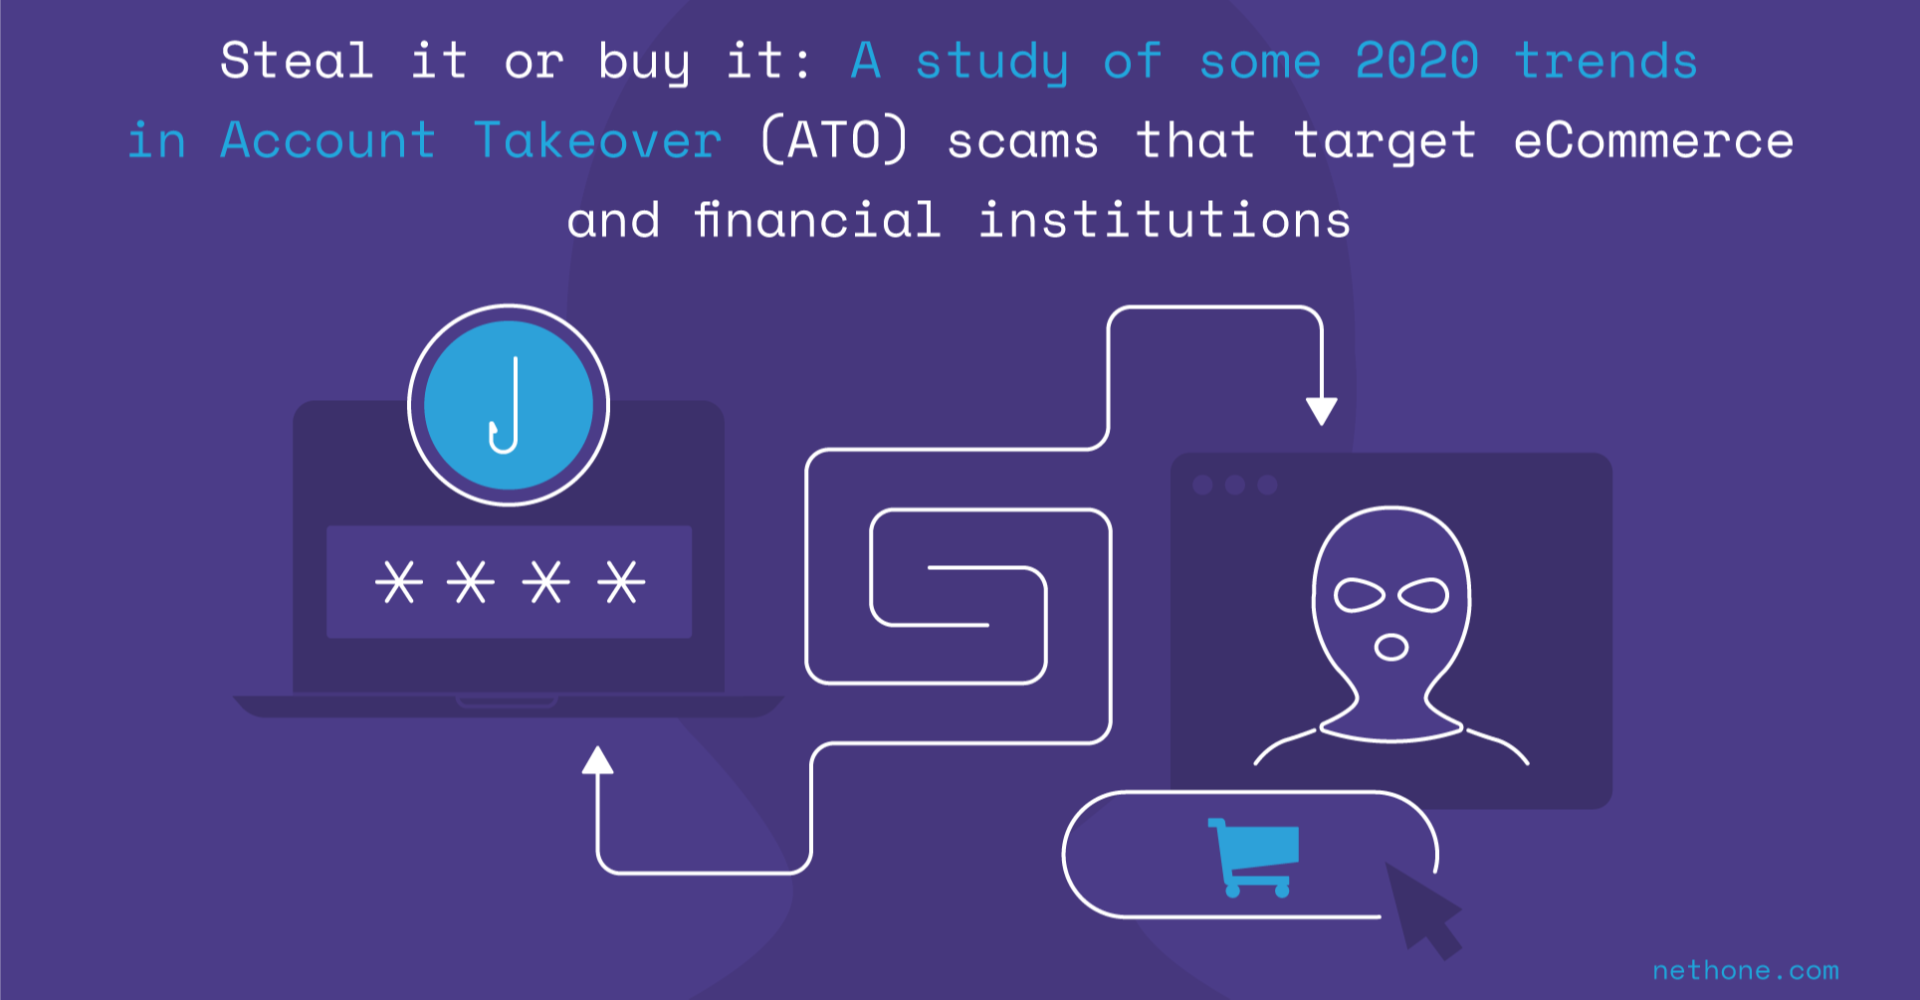 2020 trends in eCommerce and financial institutions: account takeover fraud